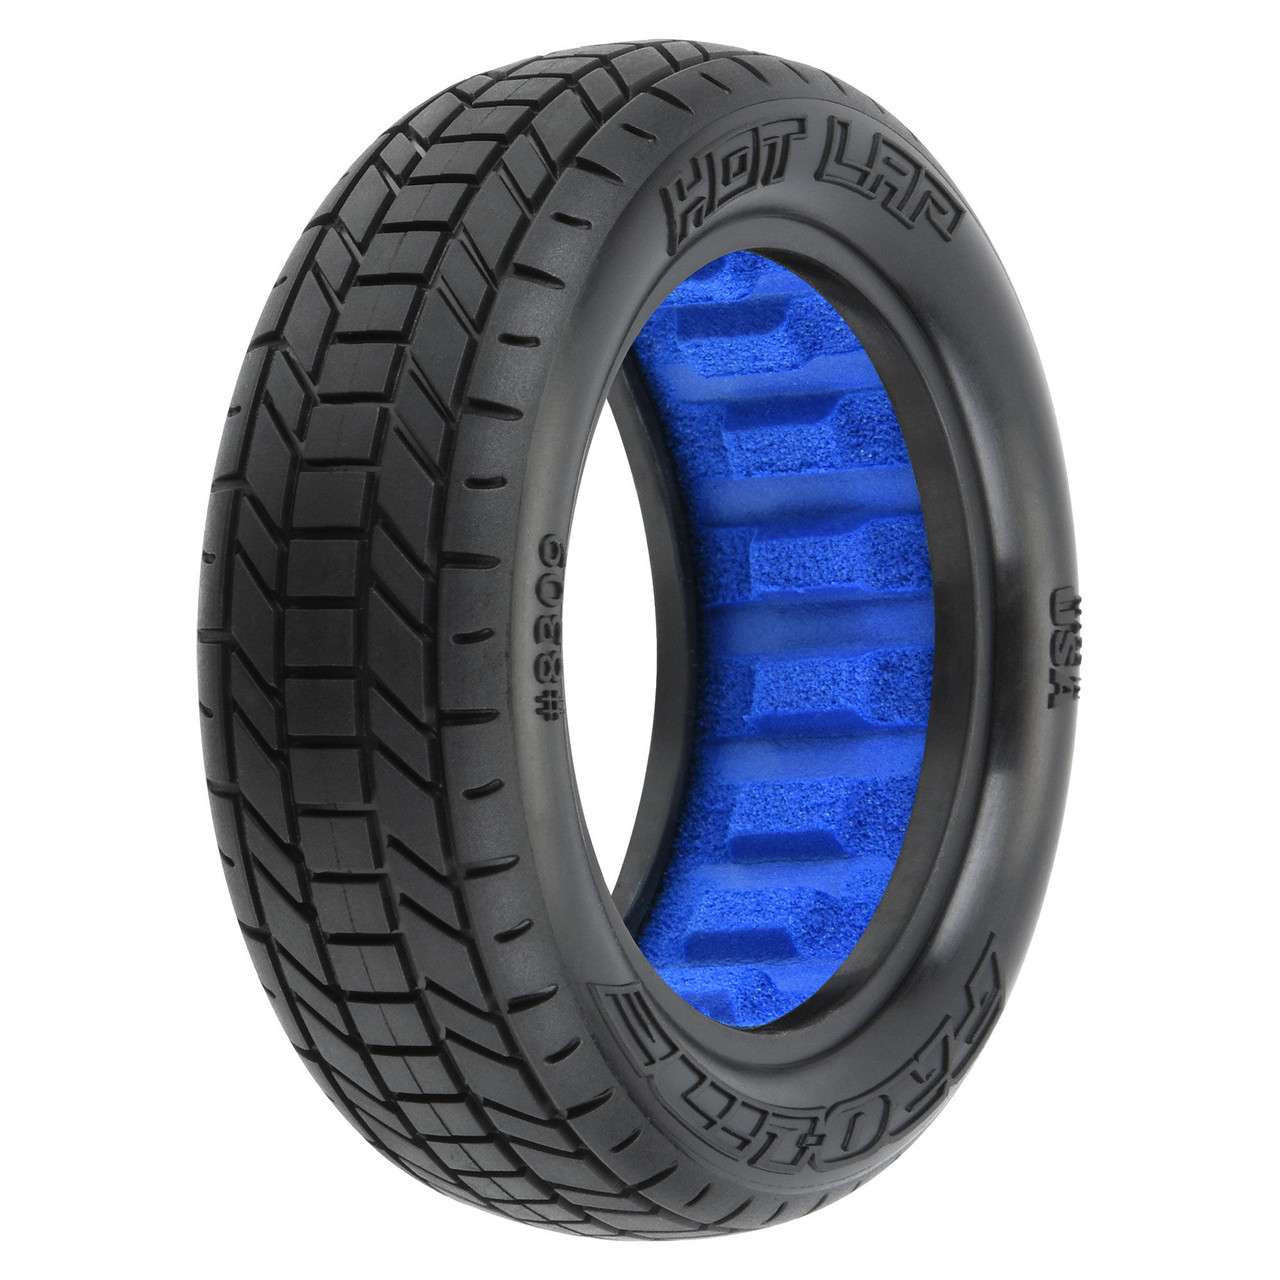 Pro-Line 1/10 Hot Lap MC 2WD Front 2.2" Dirt Oval Buggy Tires (2)